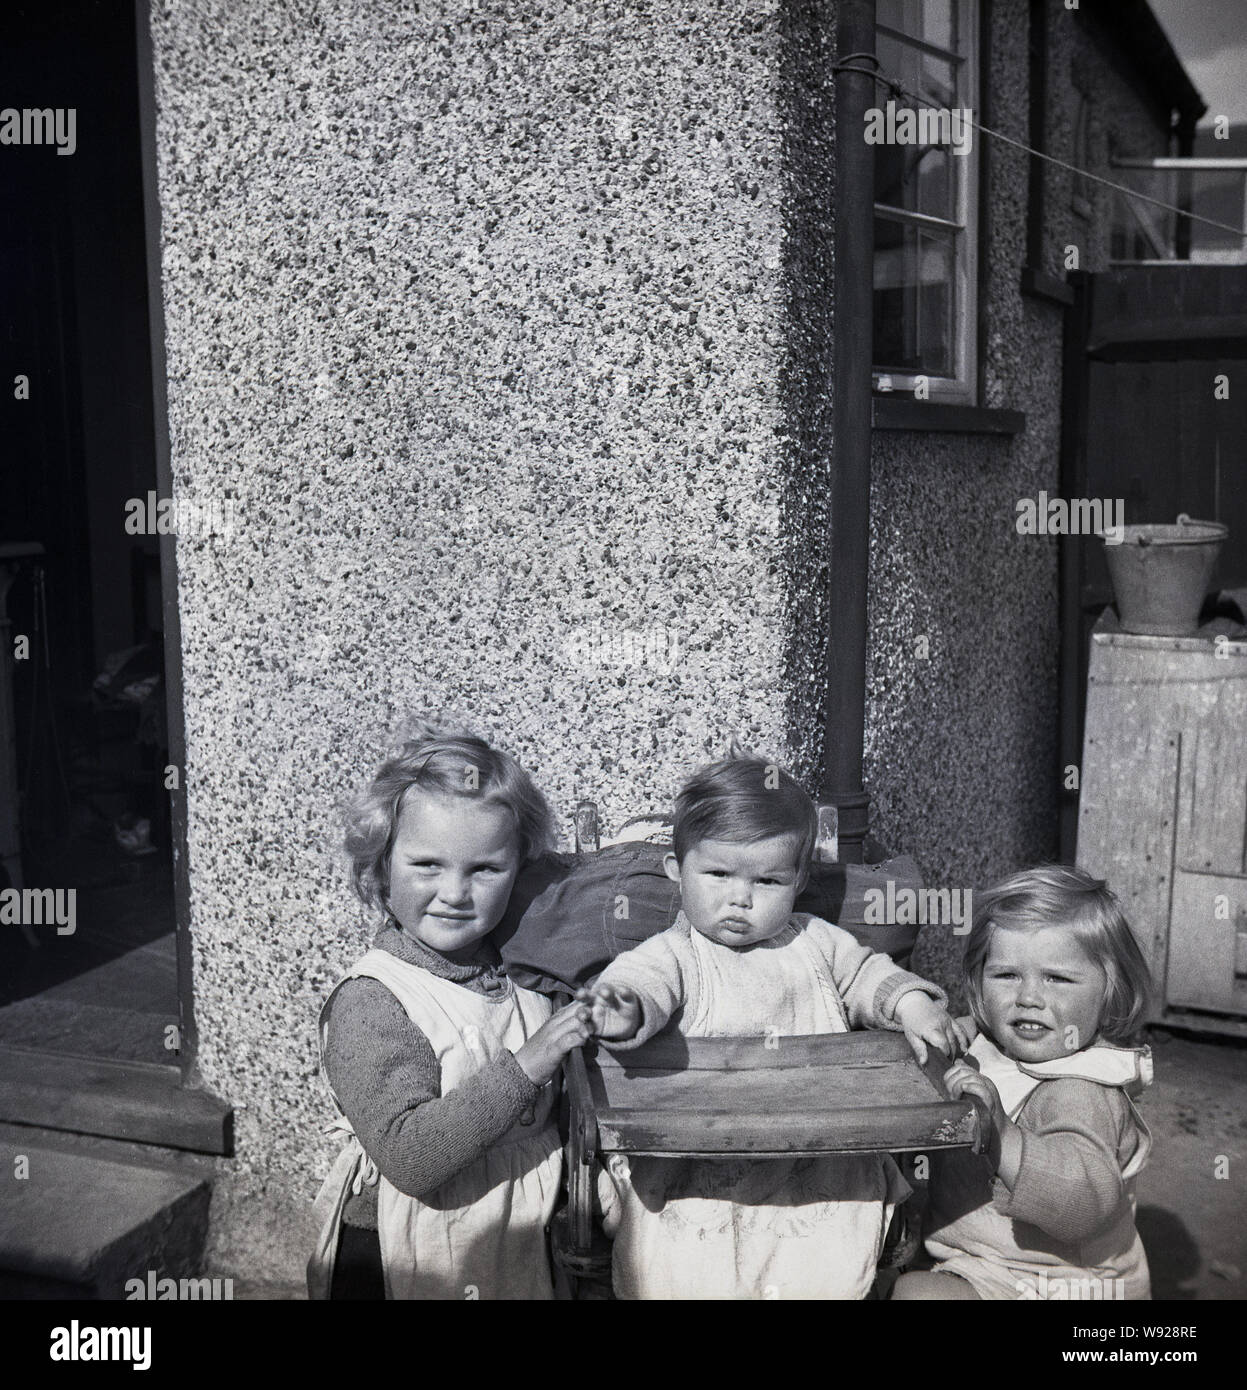 1950s, histroical, two young girls outside the backdoor of pebble-dash house, with their little infant sister sitting in a wooden high-chair, England, UK. Stock Photo